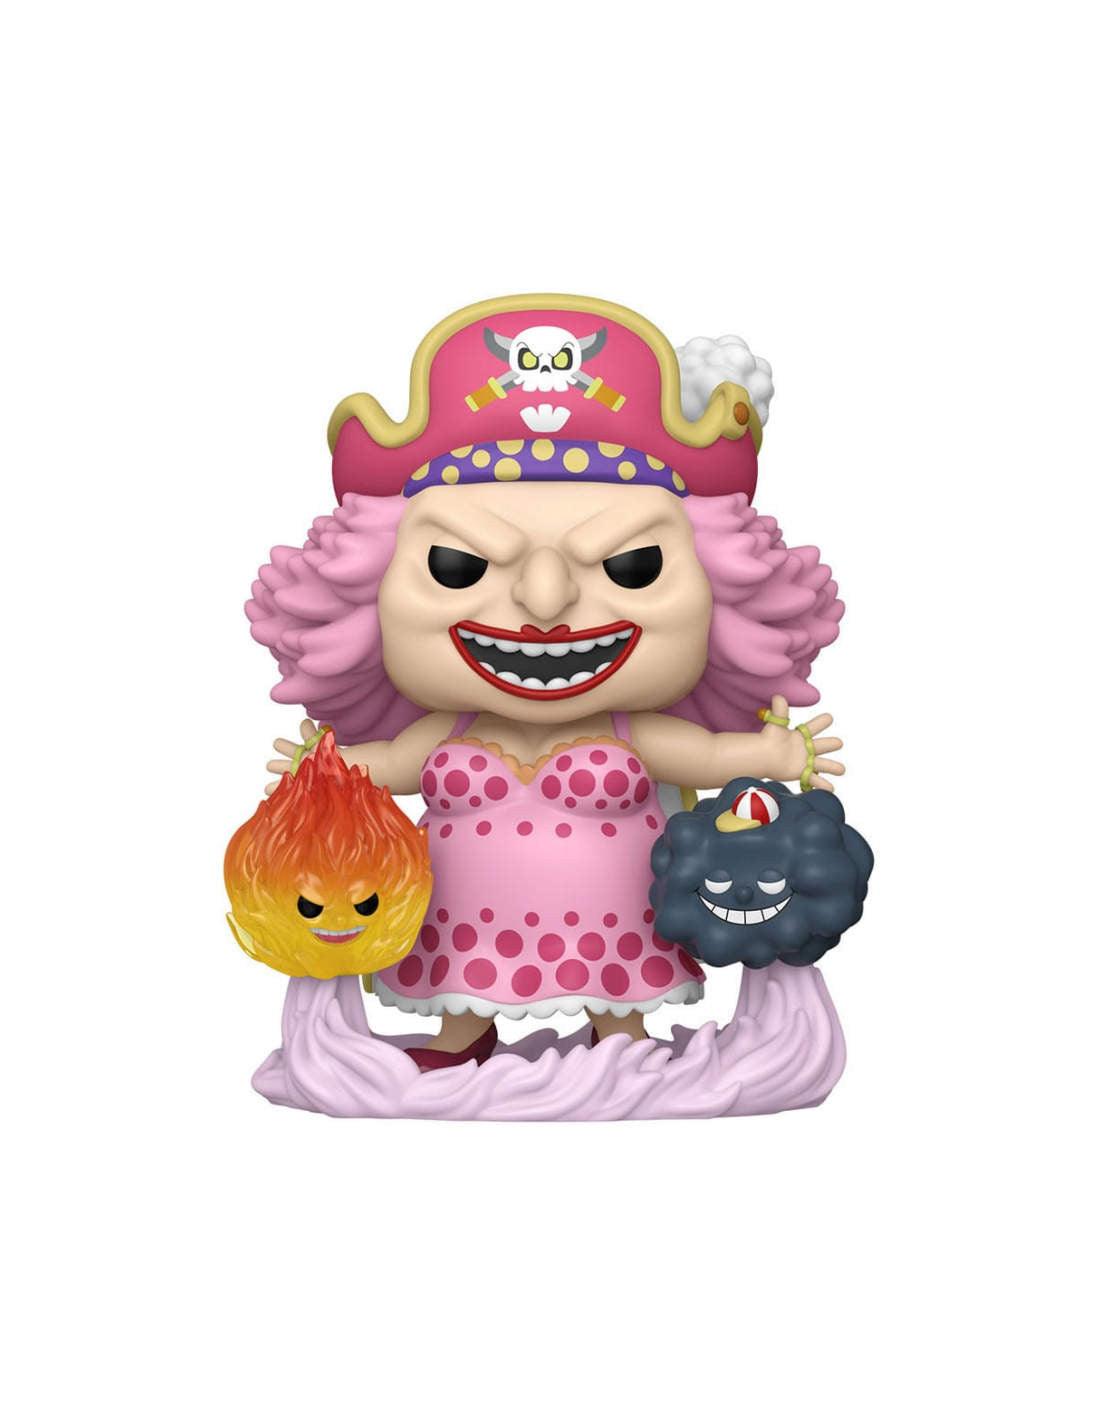 One Piece: Funko POP! Animation - Big Mom with homies #1272 Funko Special Edition - Magic Dreams Store